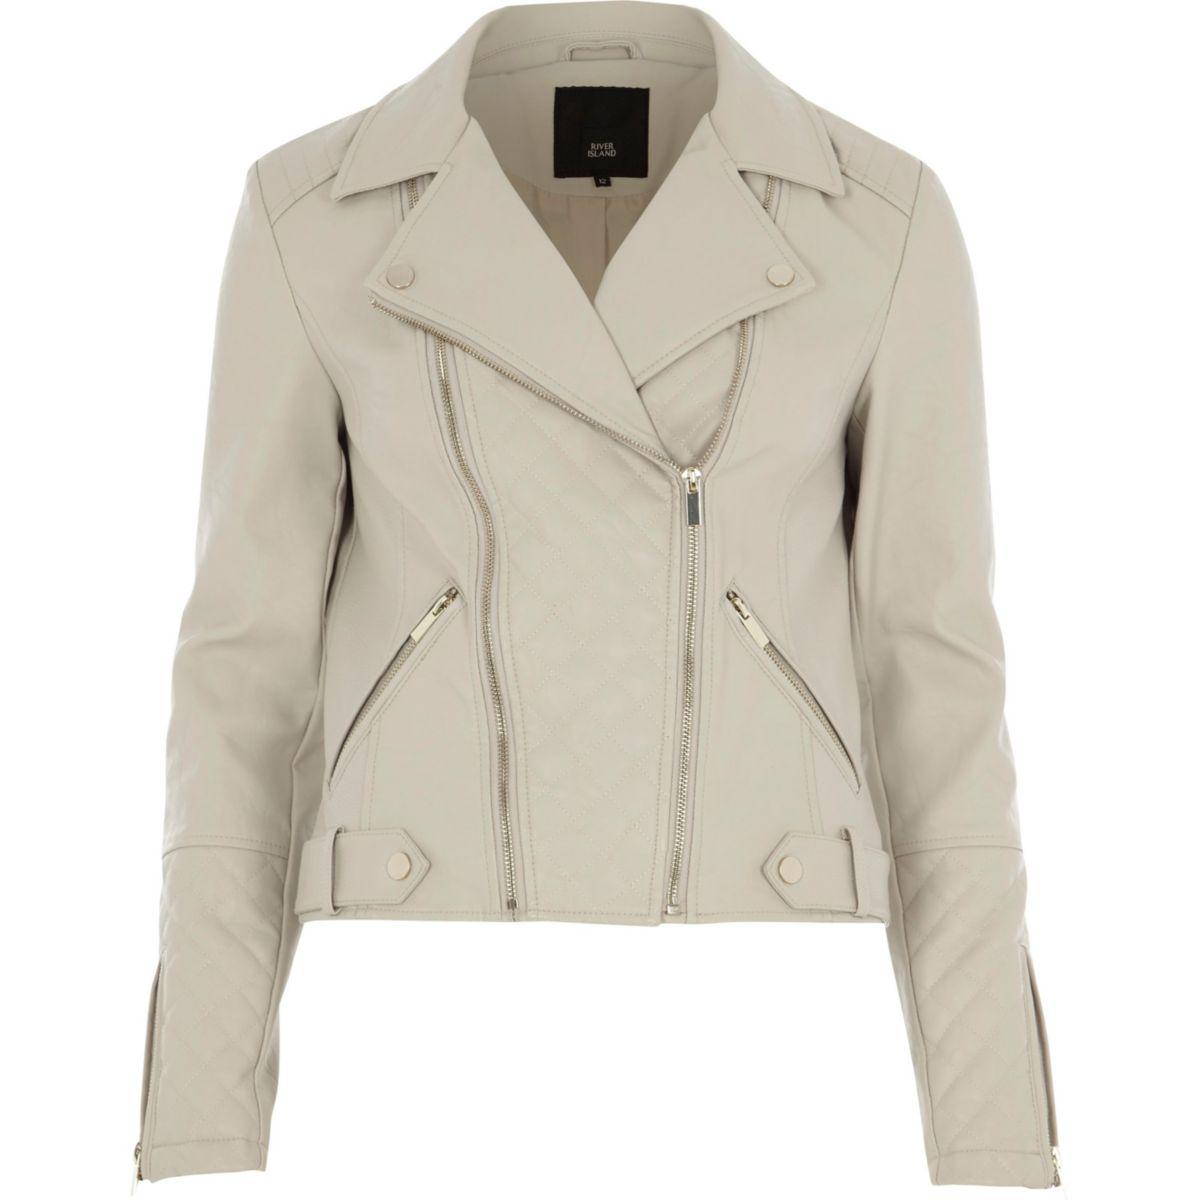 River Island Cream Quilted Faux Leather Biker Jacket Cream Quilted Faux ...